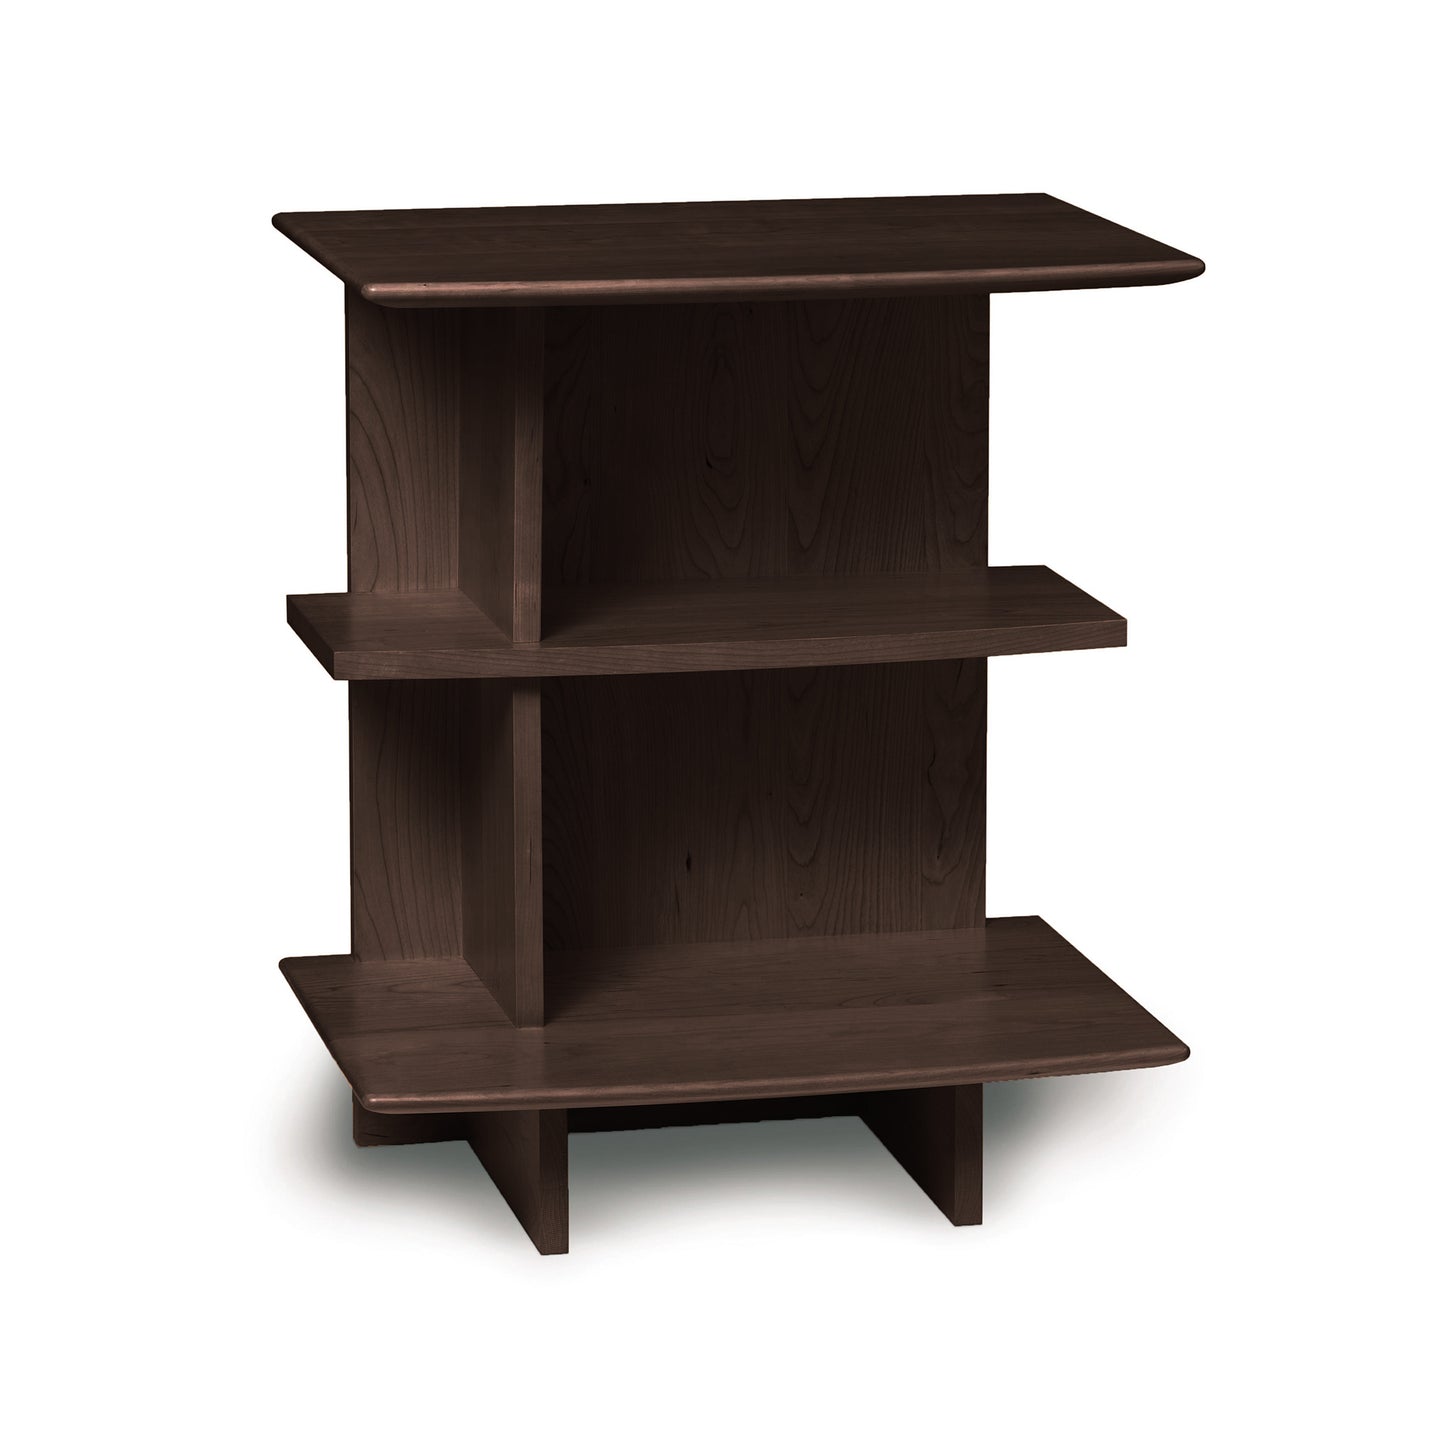 A three-tiered, brown wooden corner shelf from the Copeland Furniture Sarah Open Shelf Nightstand Collection, isolated on a white background.